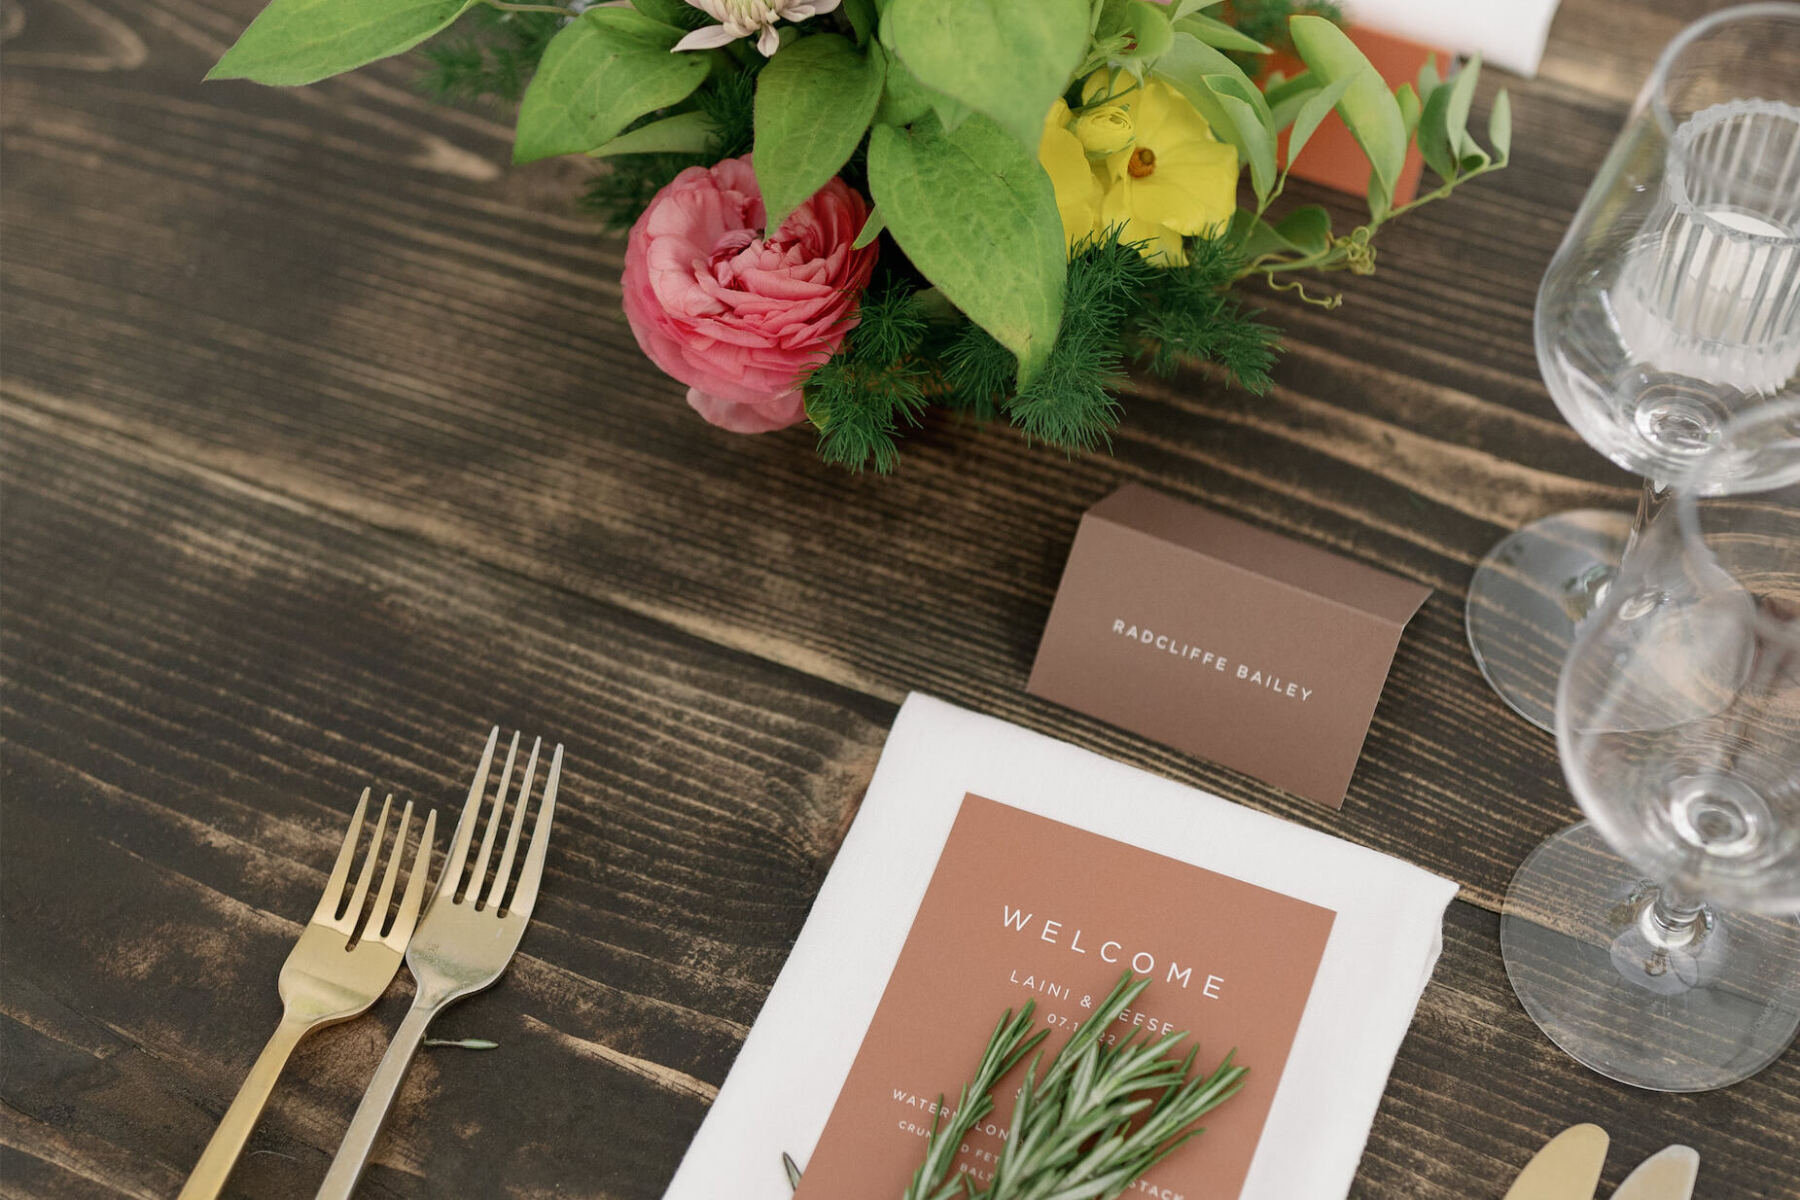 Simple, sans serif text was used on paper goods at an authentic modern wedding.